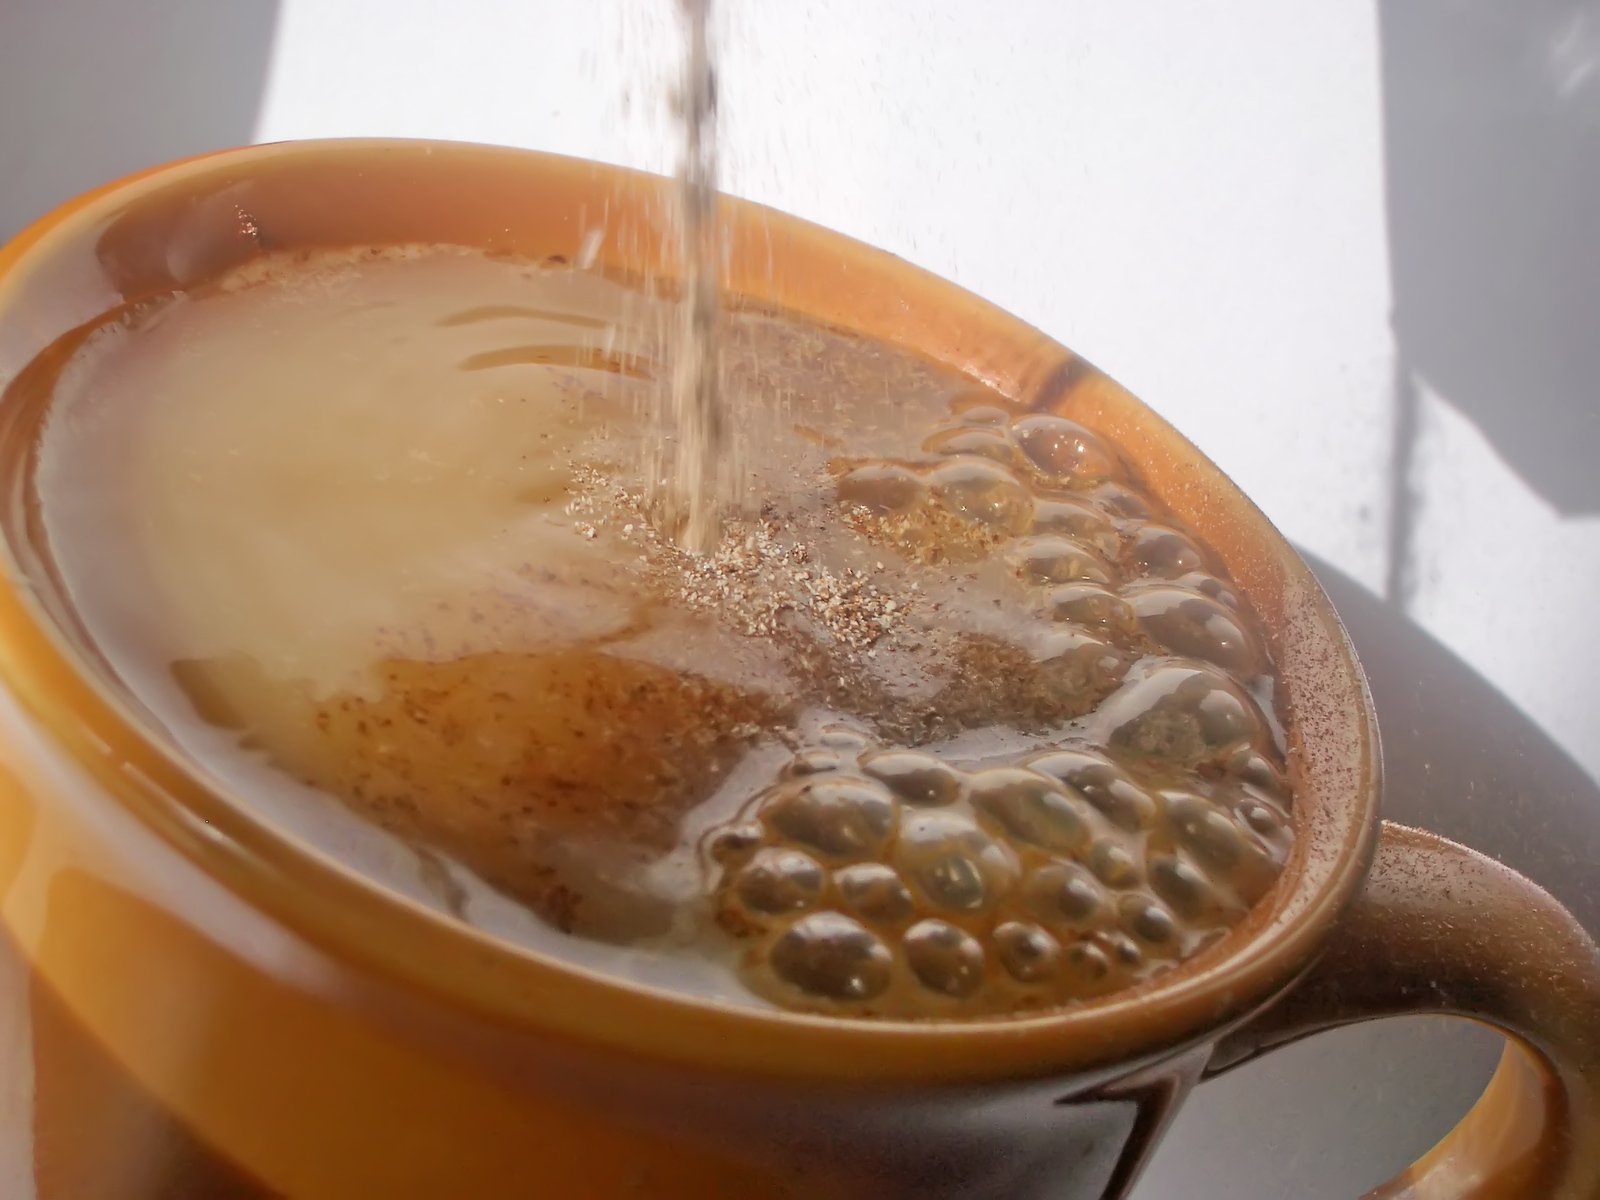 water is flowing from the faucet in a coffee mug